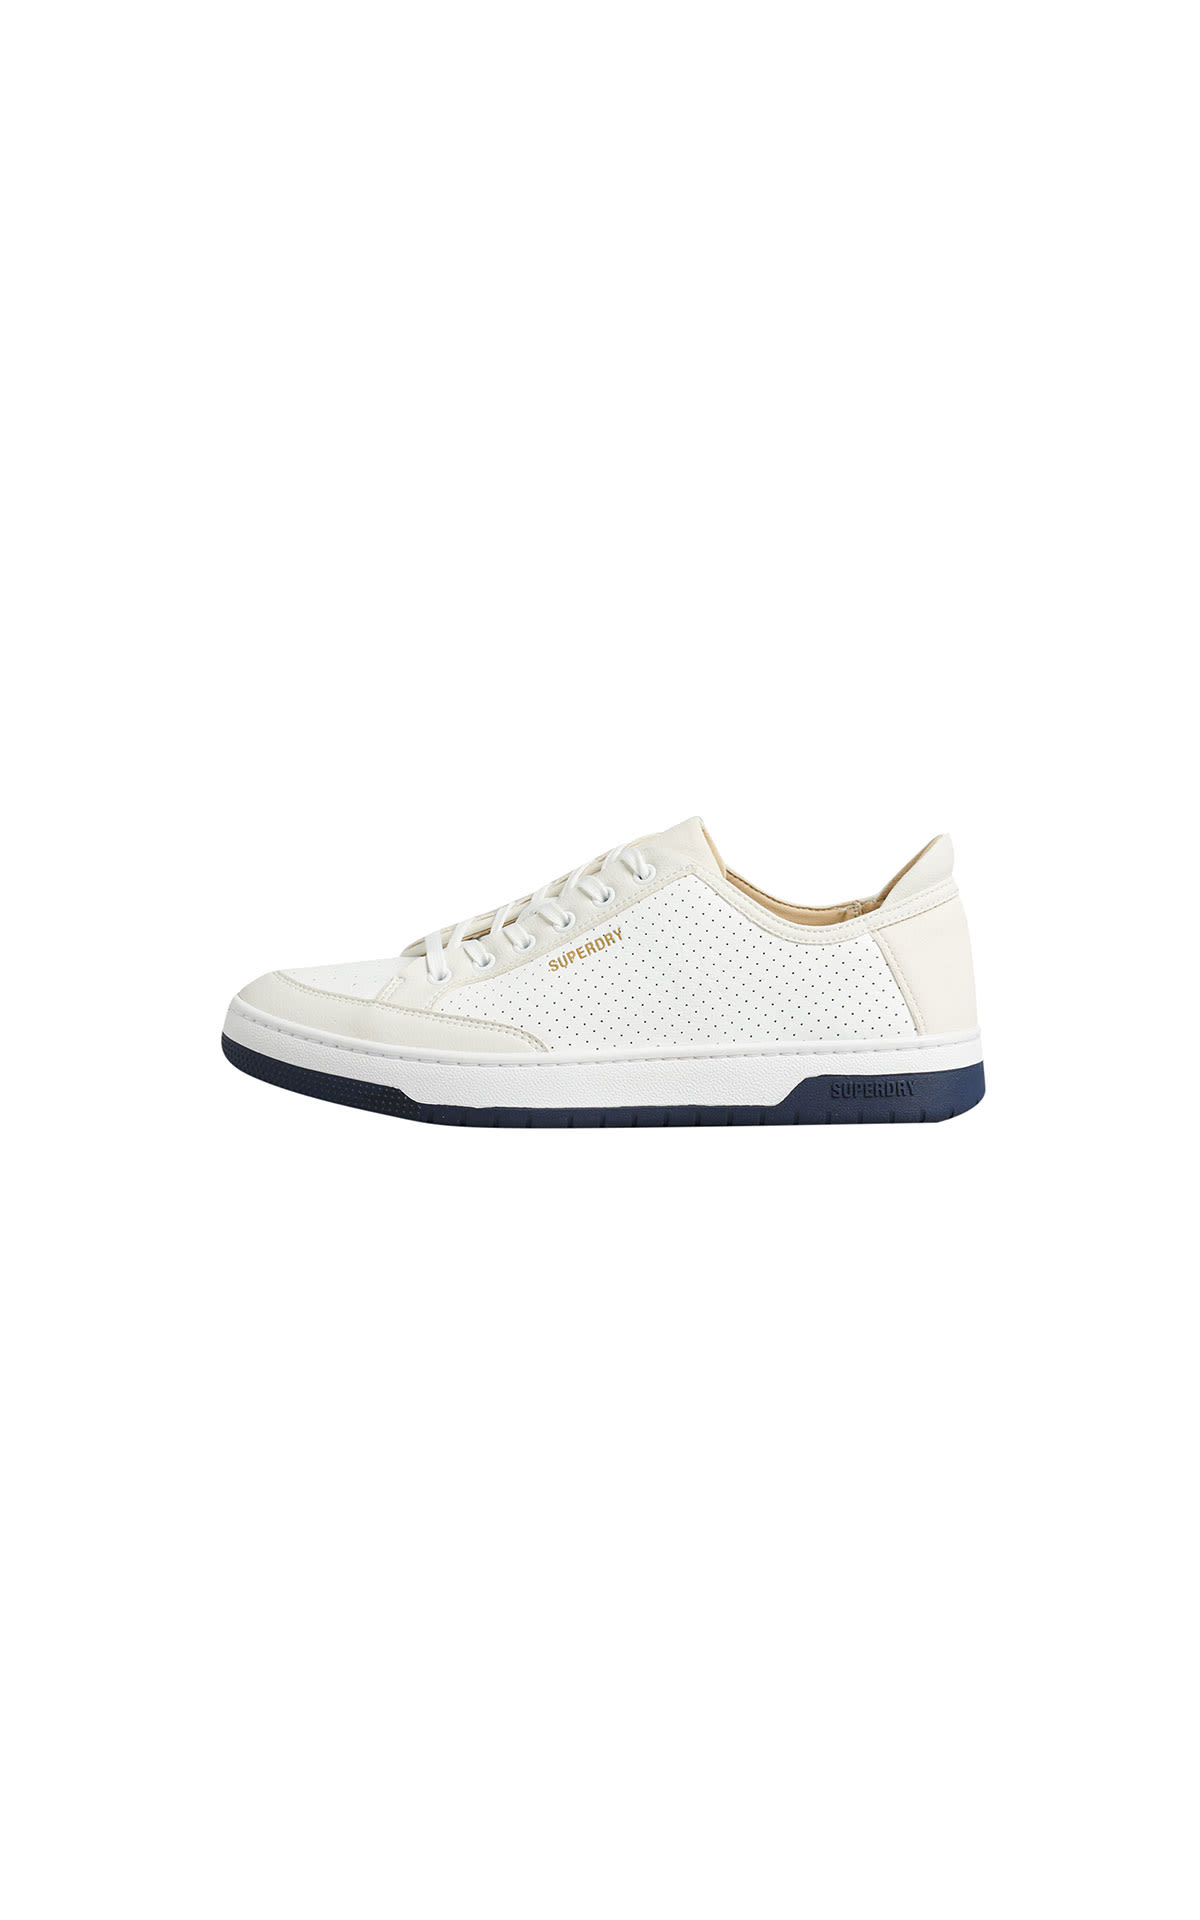 Superdry White trainers womens from Bicester Village